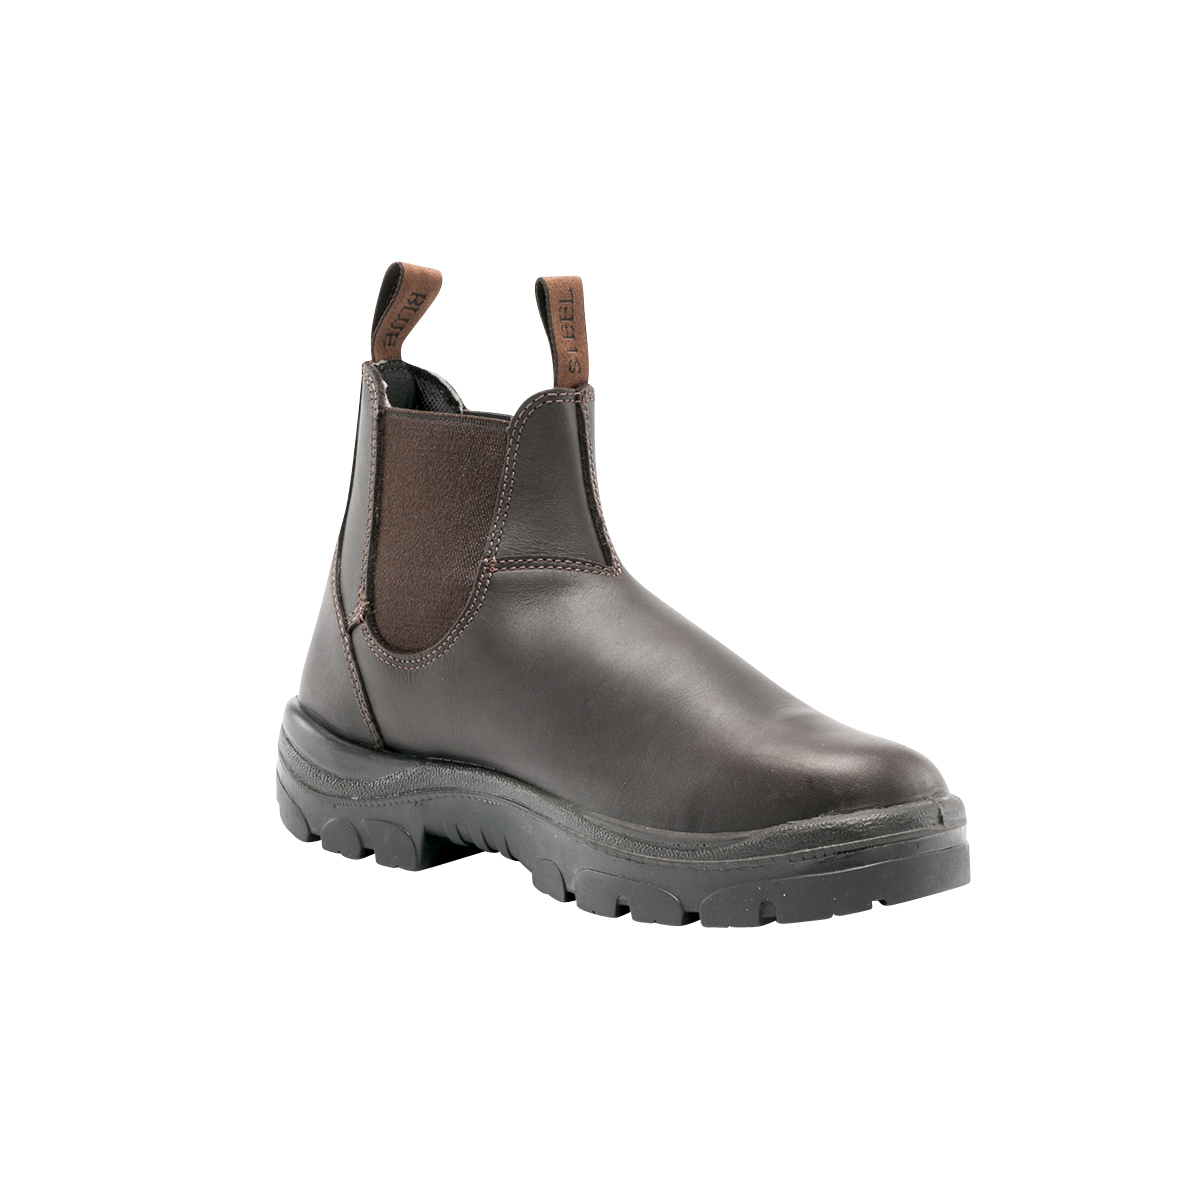 SAFETY BOOT HOBART BROWN S10 -SLIP ON